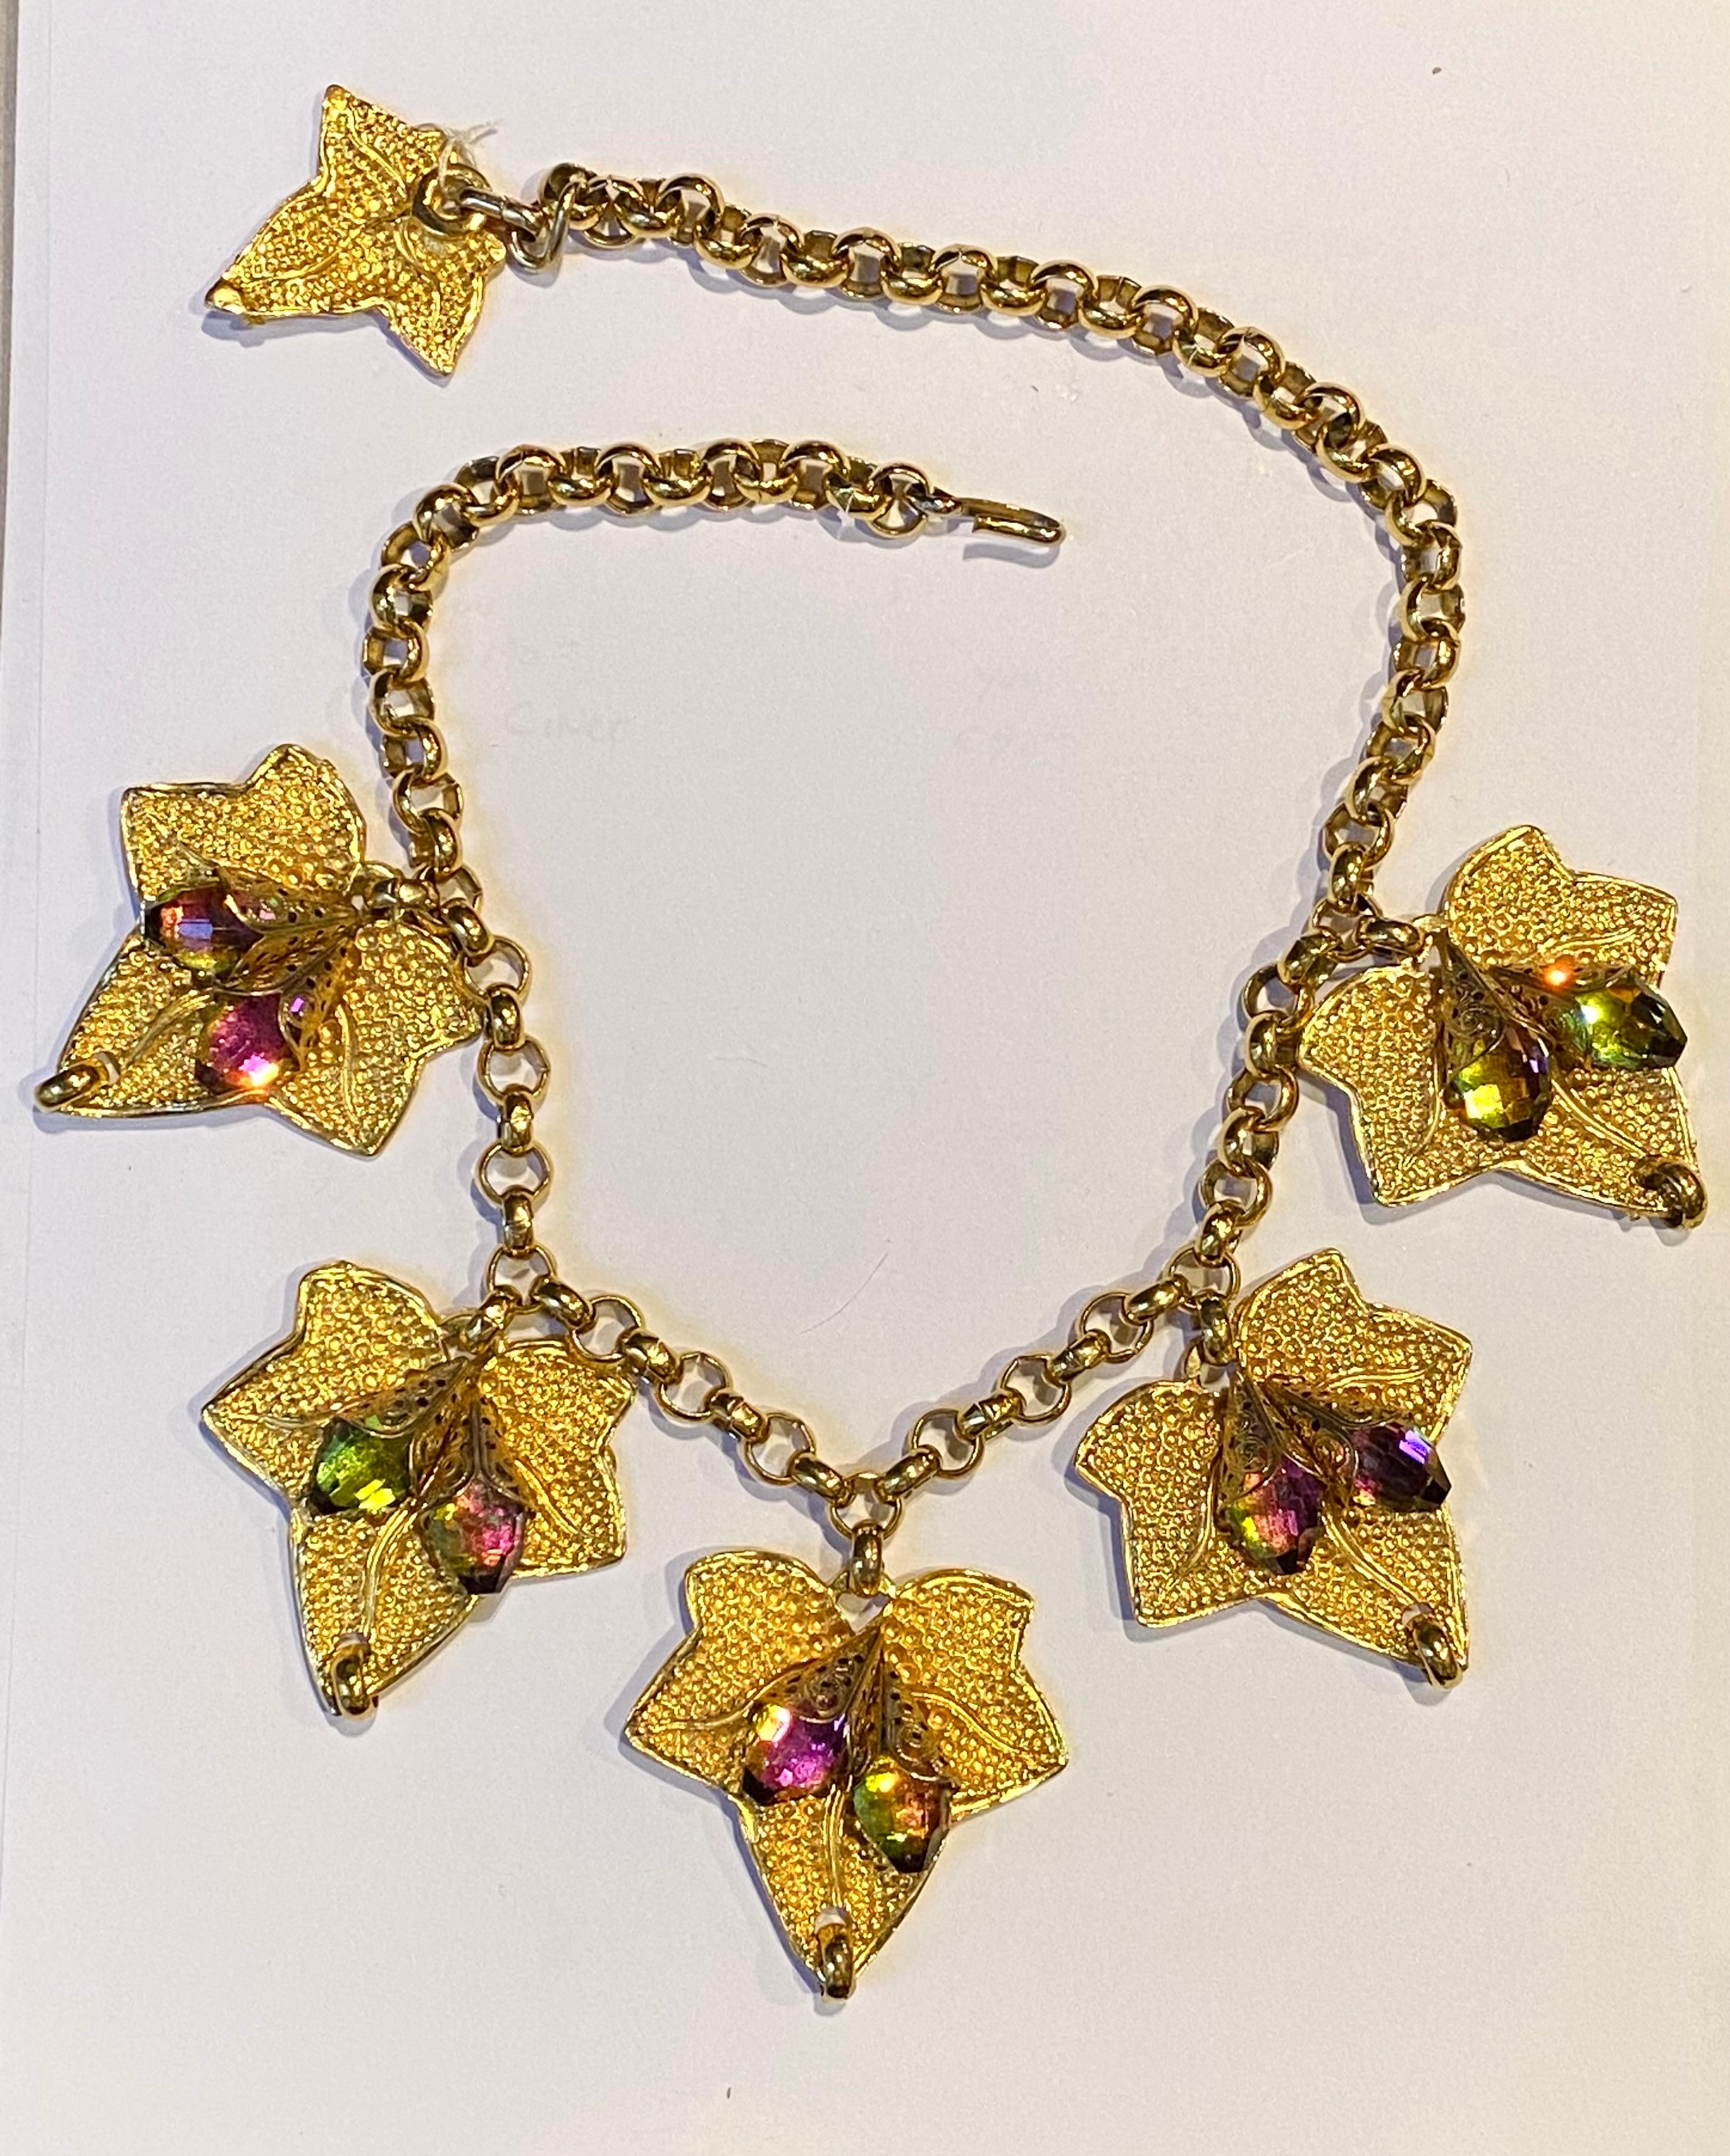 A lovely ivy leaf statement necklace from the 1980s. Unsigned yet well designed and crafted. The necklace is comprised of a .32 if an inch round cable link strand with five large and one small ivy leaf pendants. The five large leaves measure 2.13